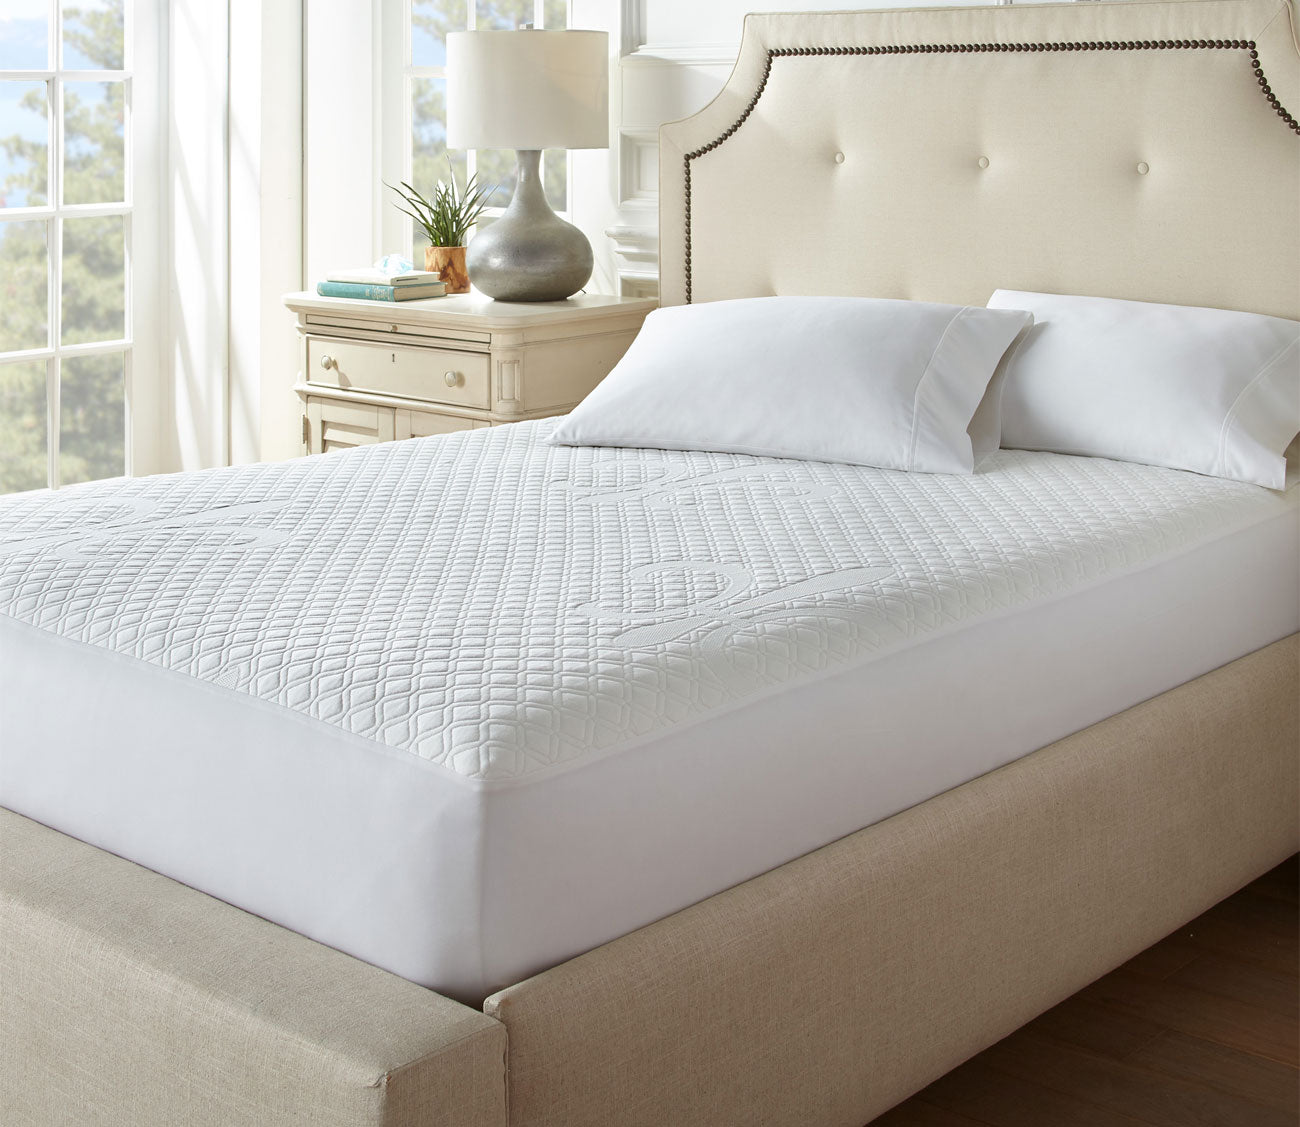 Cooling Waterproof Mattress Protector by Stearns & Foster